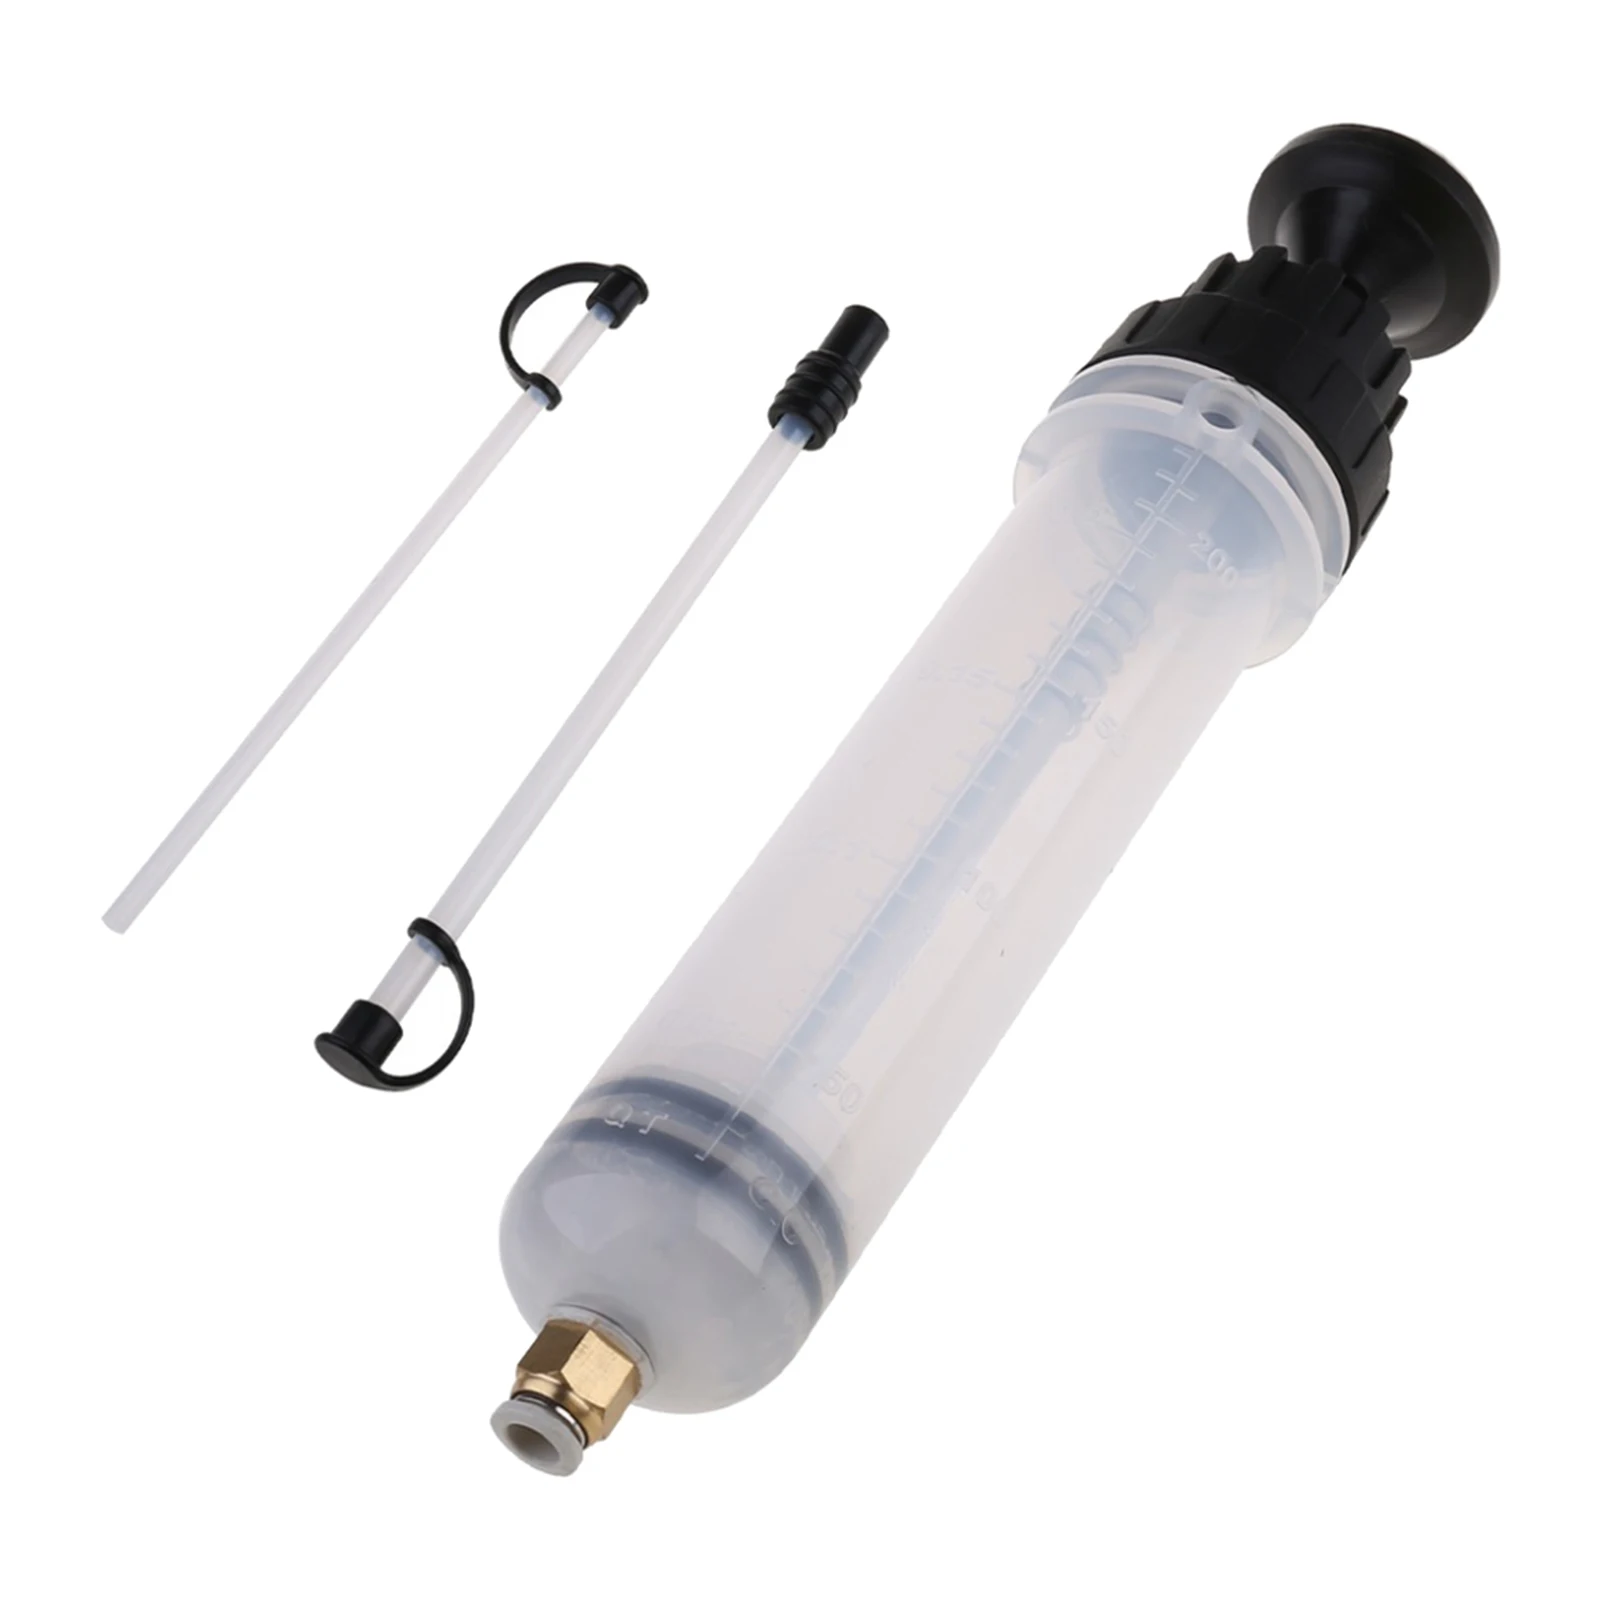 200cc Car Oil Suction Fluid Extractor Set Filling Syringe Bottle Extraction Manual Pump Tool